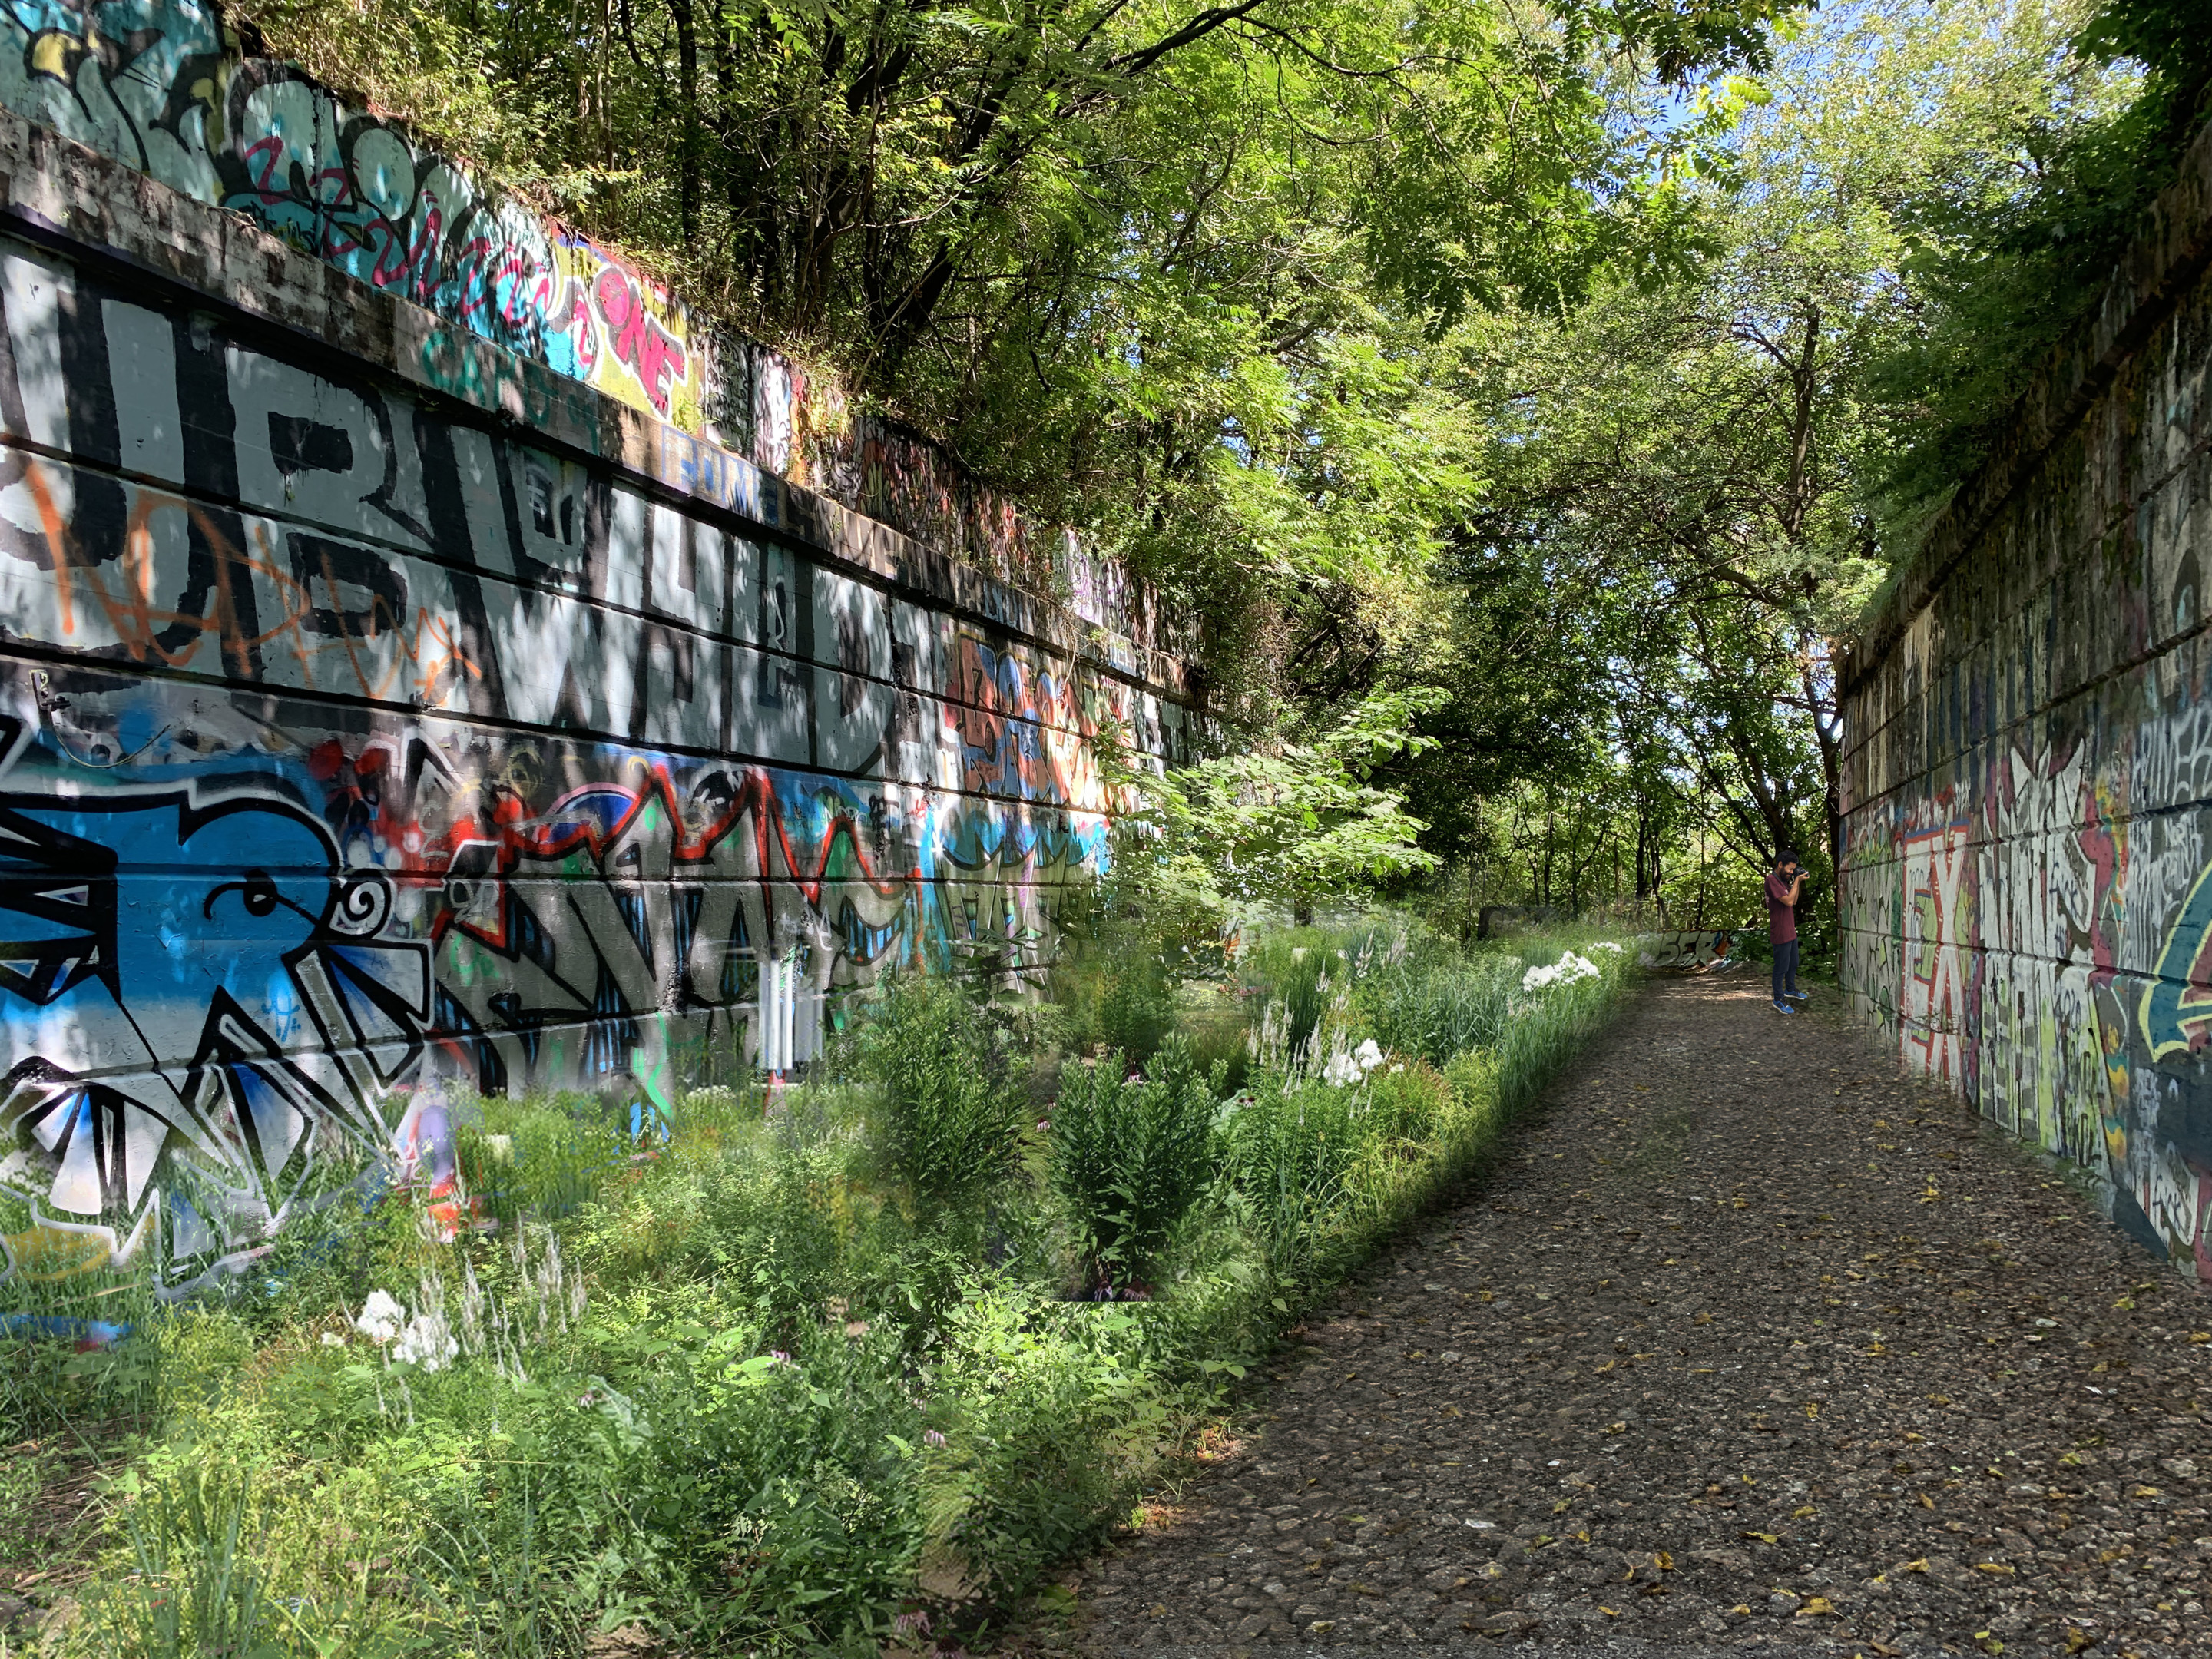 Rendering of a throughway with graffiti